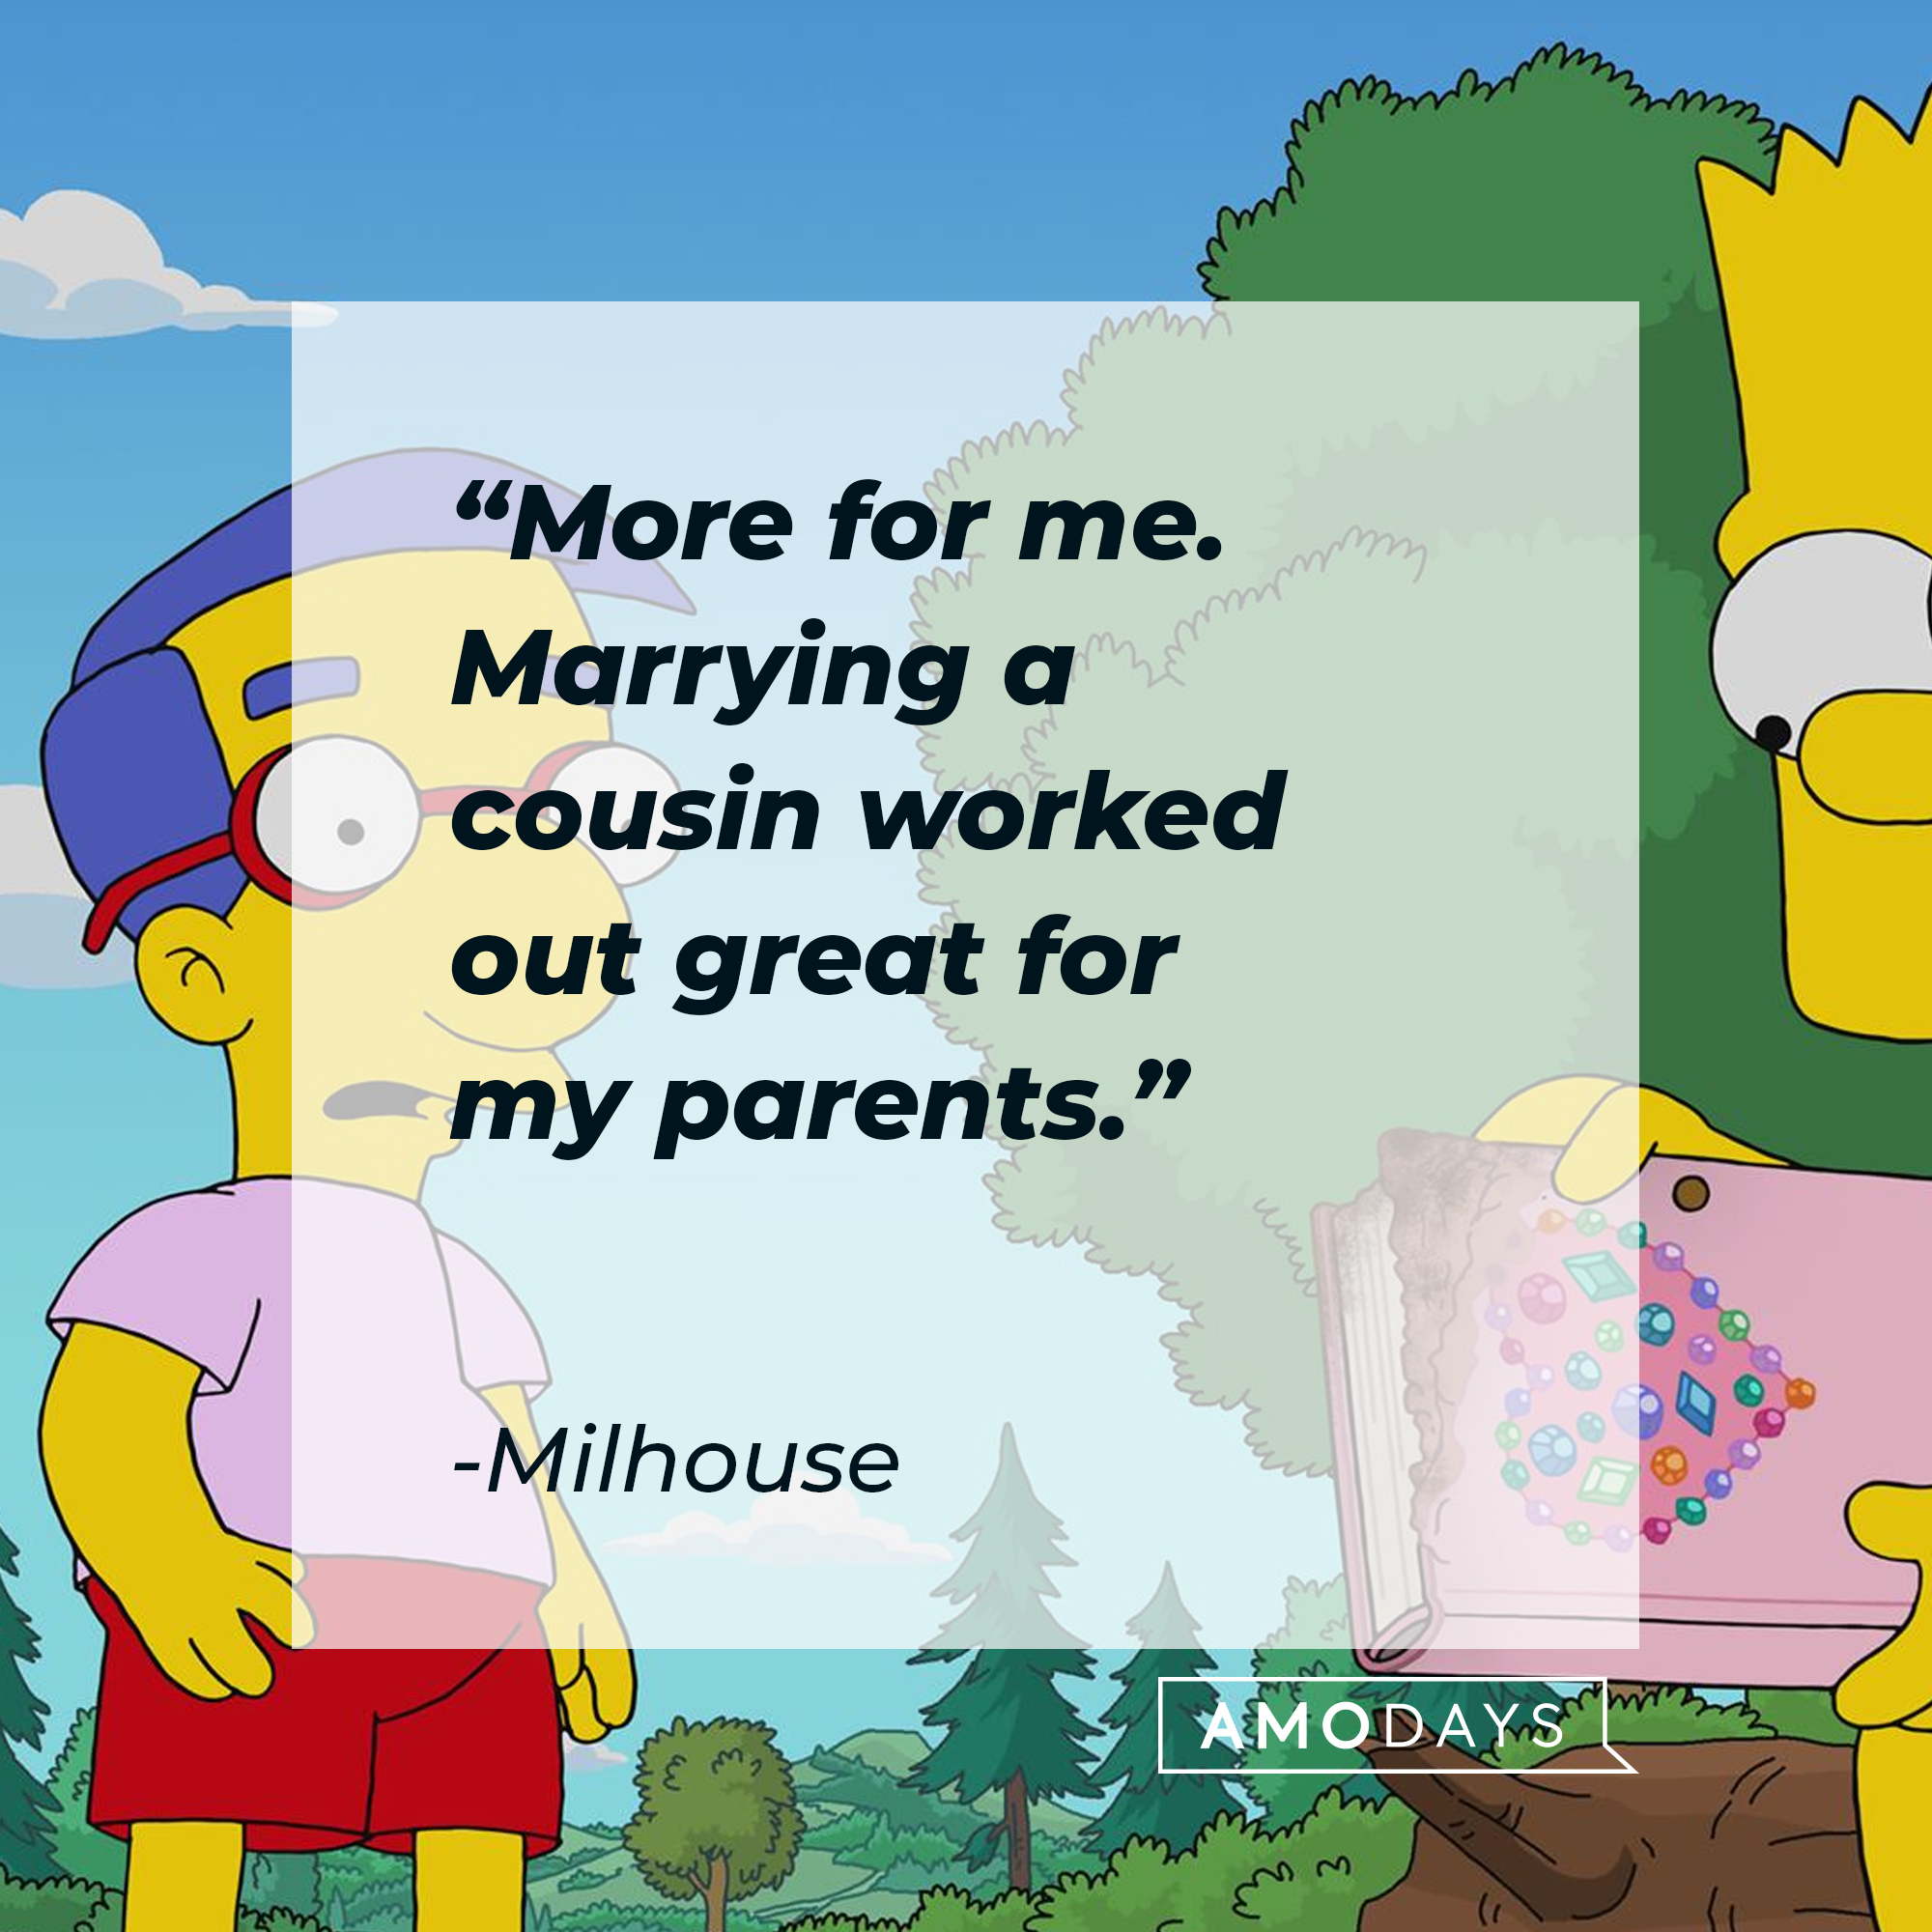 Bart Simpson and Milhouse, with Milhouse's quote: “More for me. Marrying a cousin worked out great for my parents.” | Source: facebook.com/TheSimp